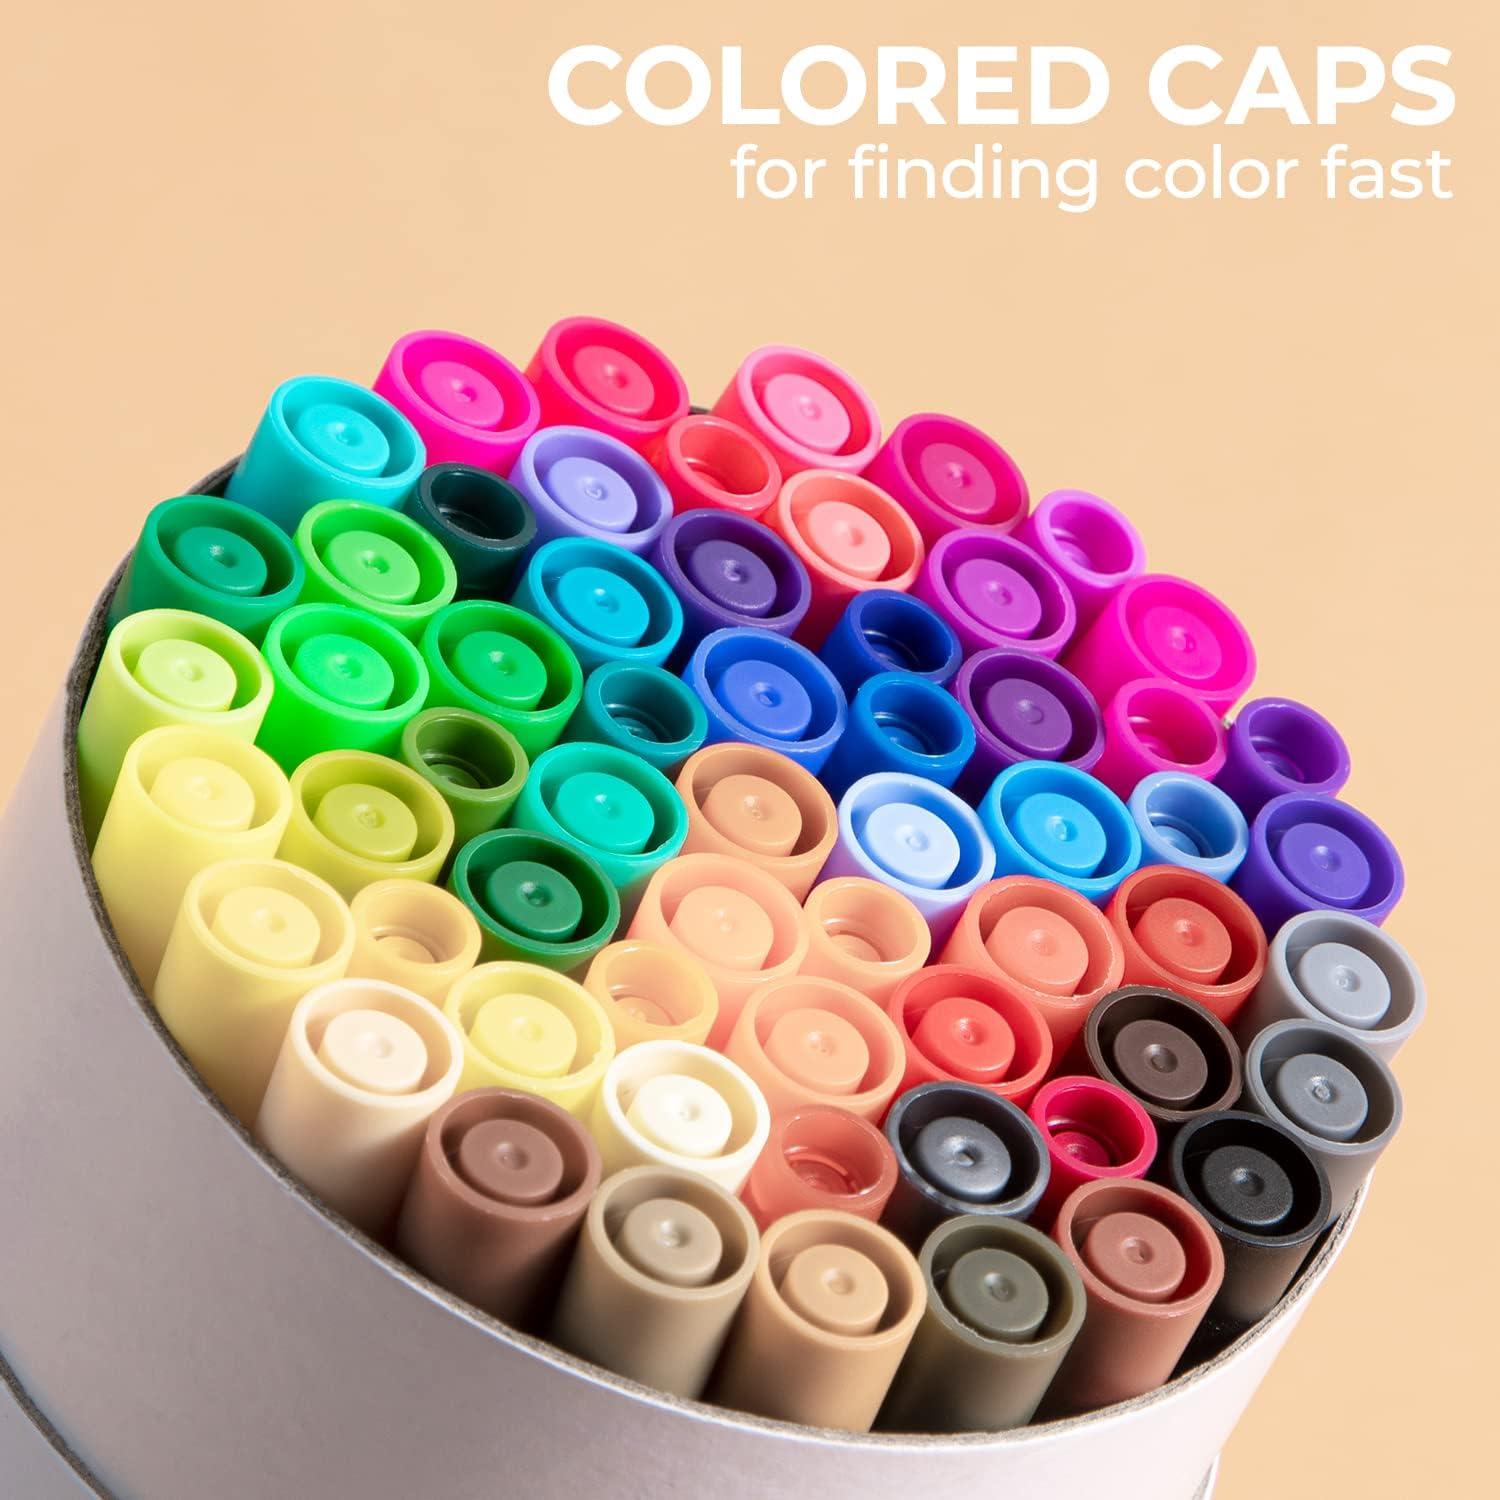  Ohuhu Markers for Adult Coloring Books: 100 Colors